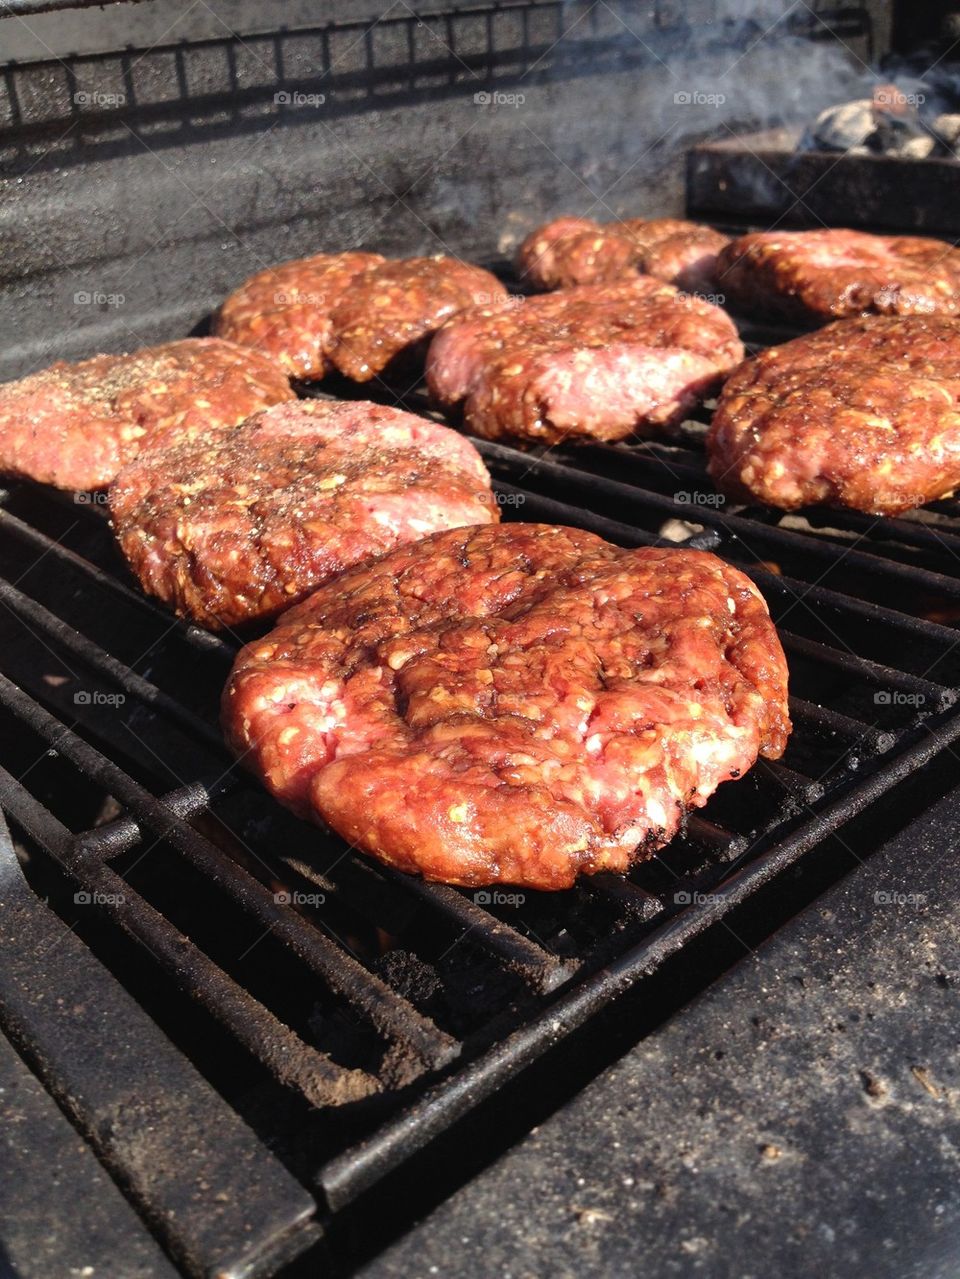 Burgers on Grill